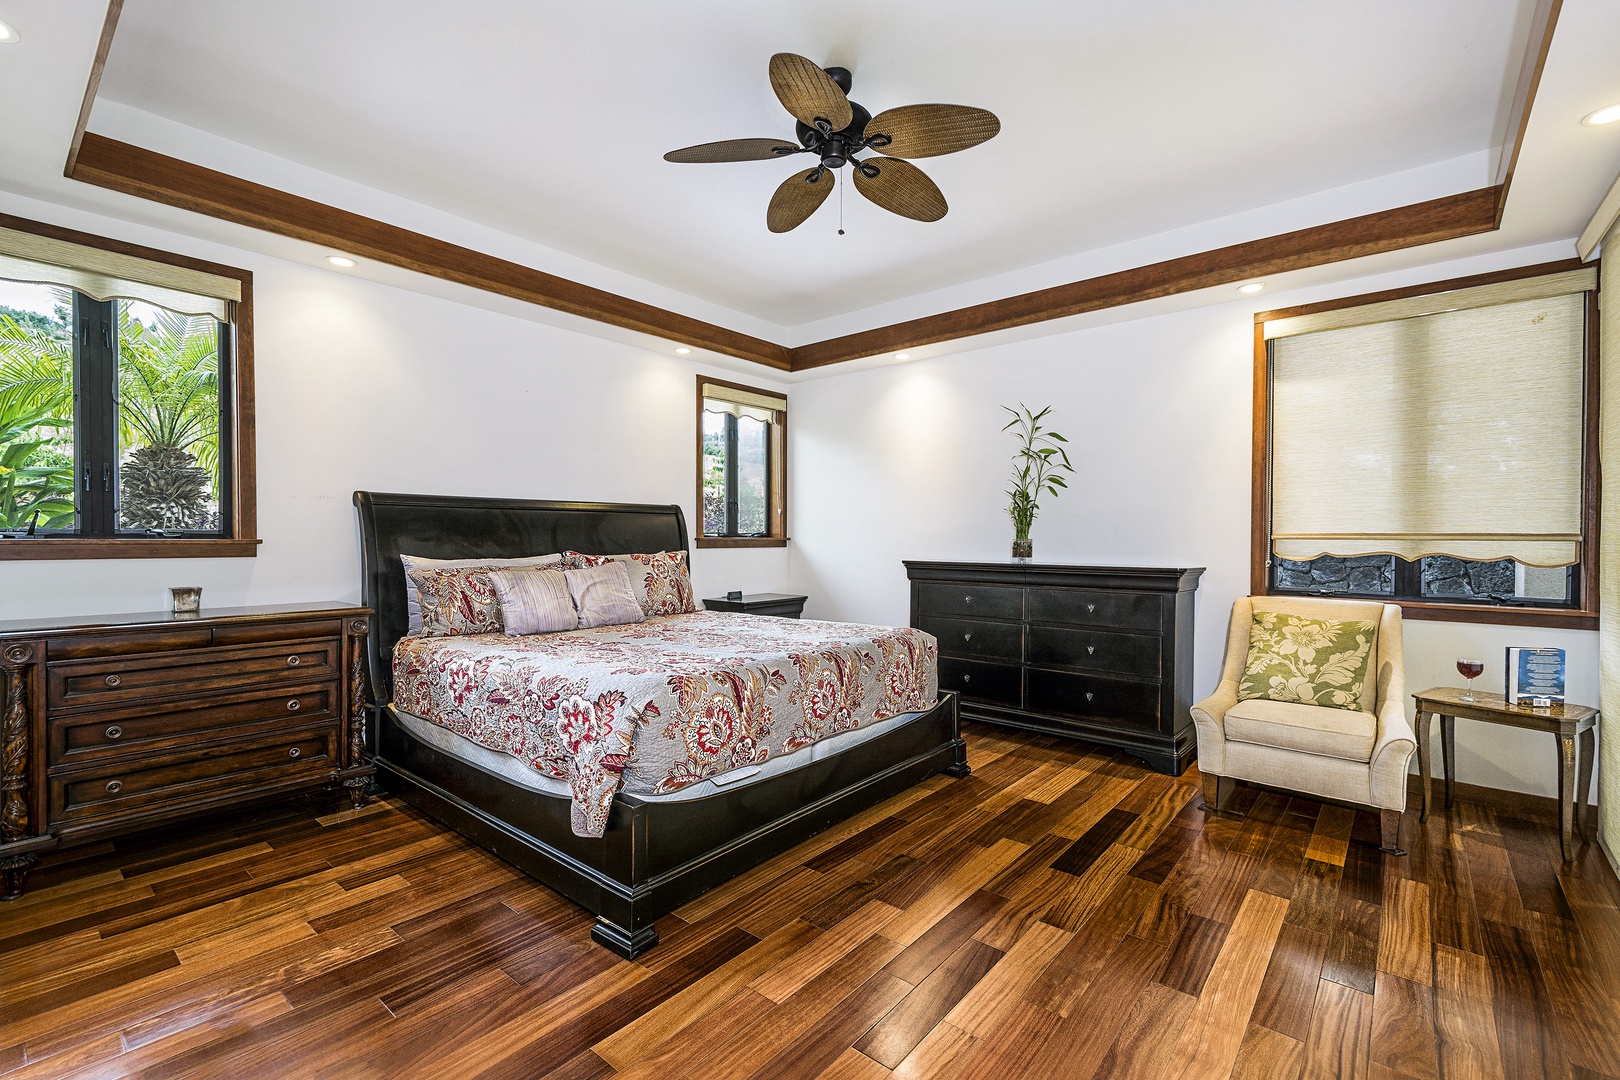 Kailua Kona Vacation Rentals, O'oma Plantation - Primary bedroom equipped with King bed and Lanai access!